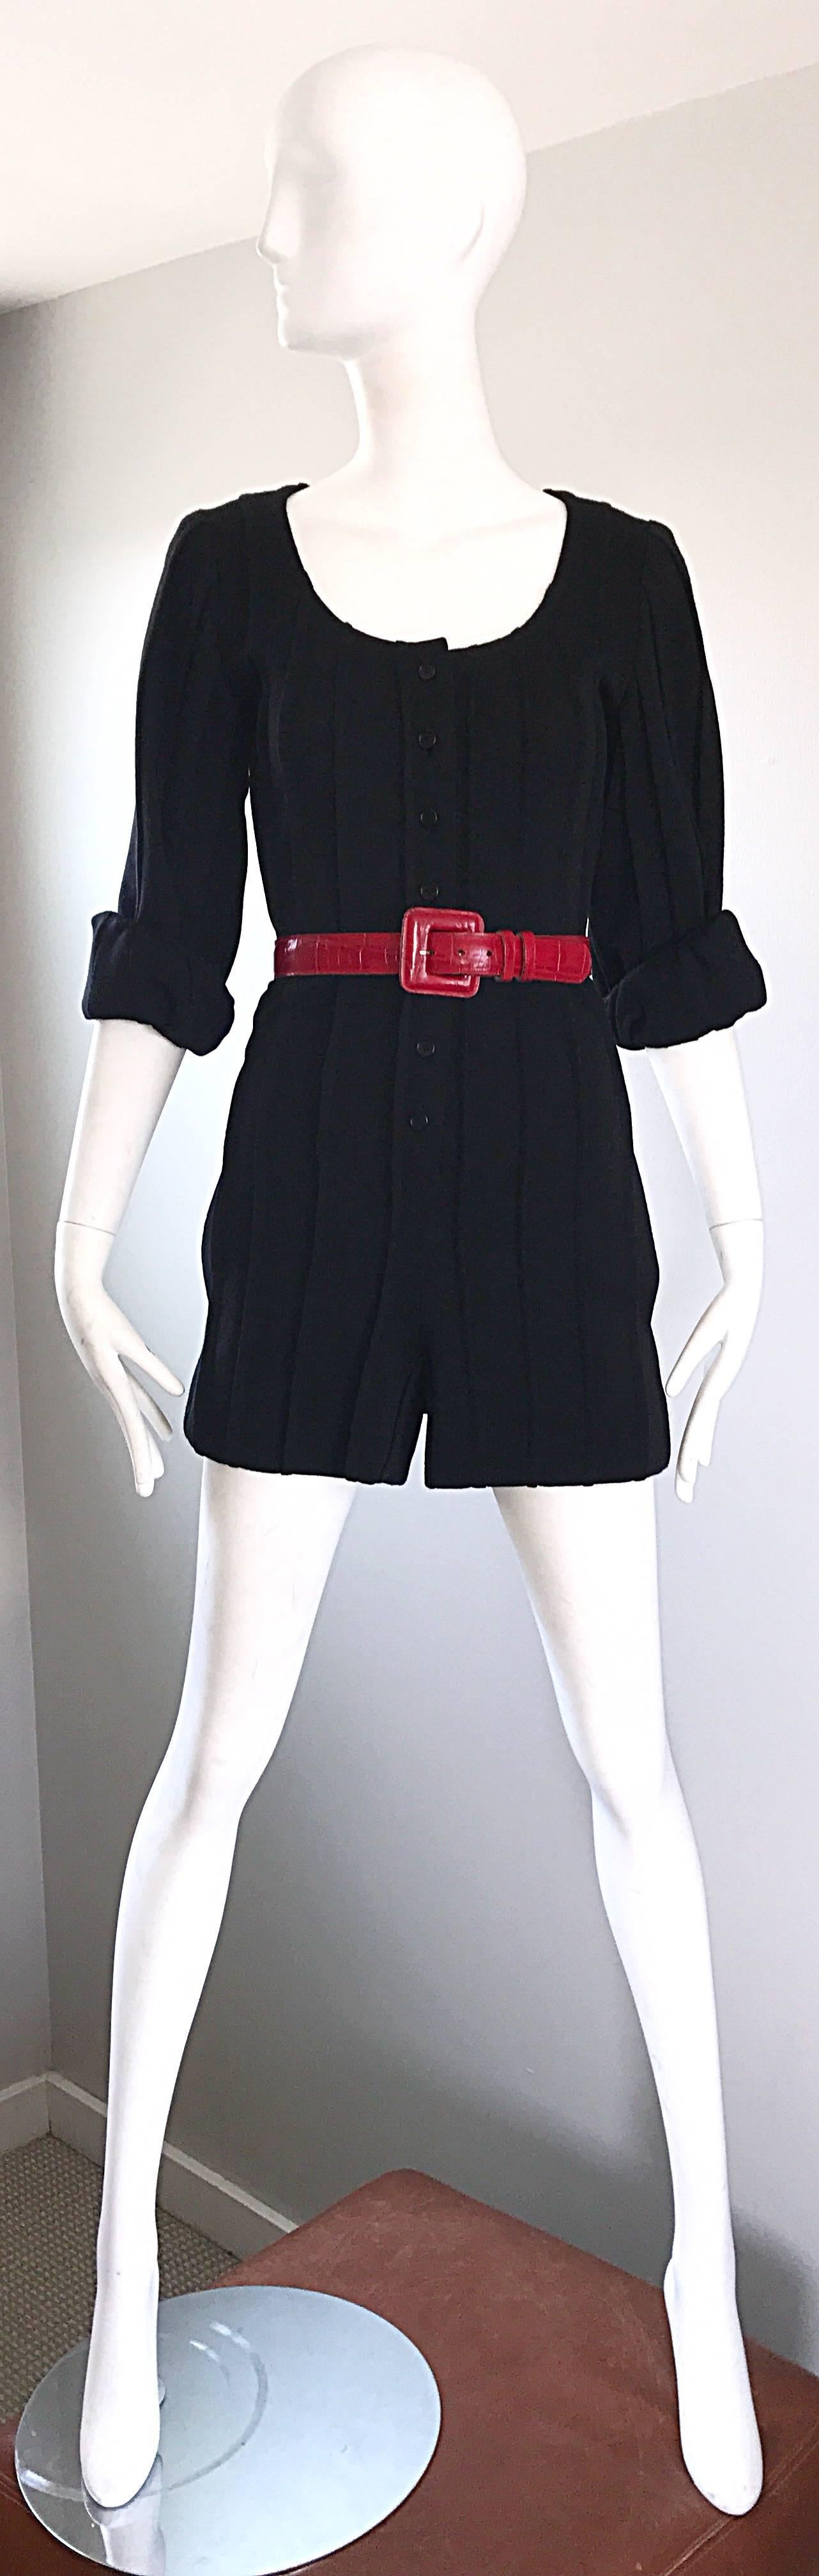 Vintage Givenchy Haute Couture Alexander McQueen Numbered Black Wool 90s Romper In Excellent Condition For Sale In San Diego, CA